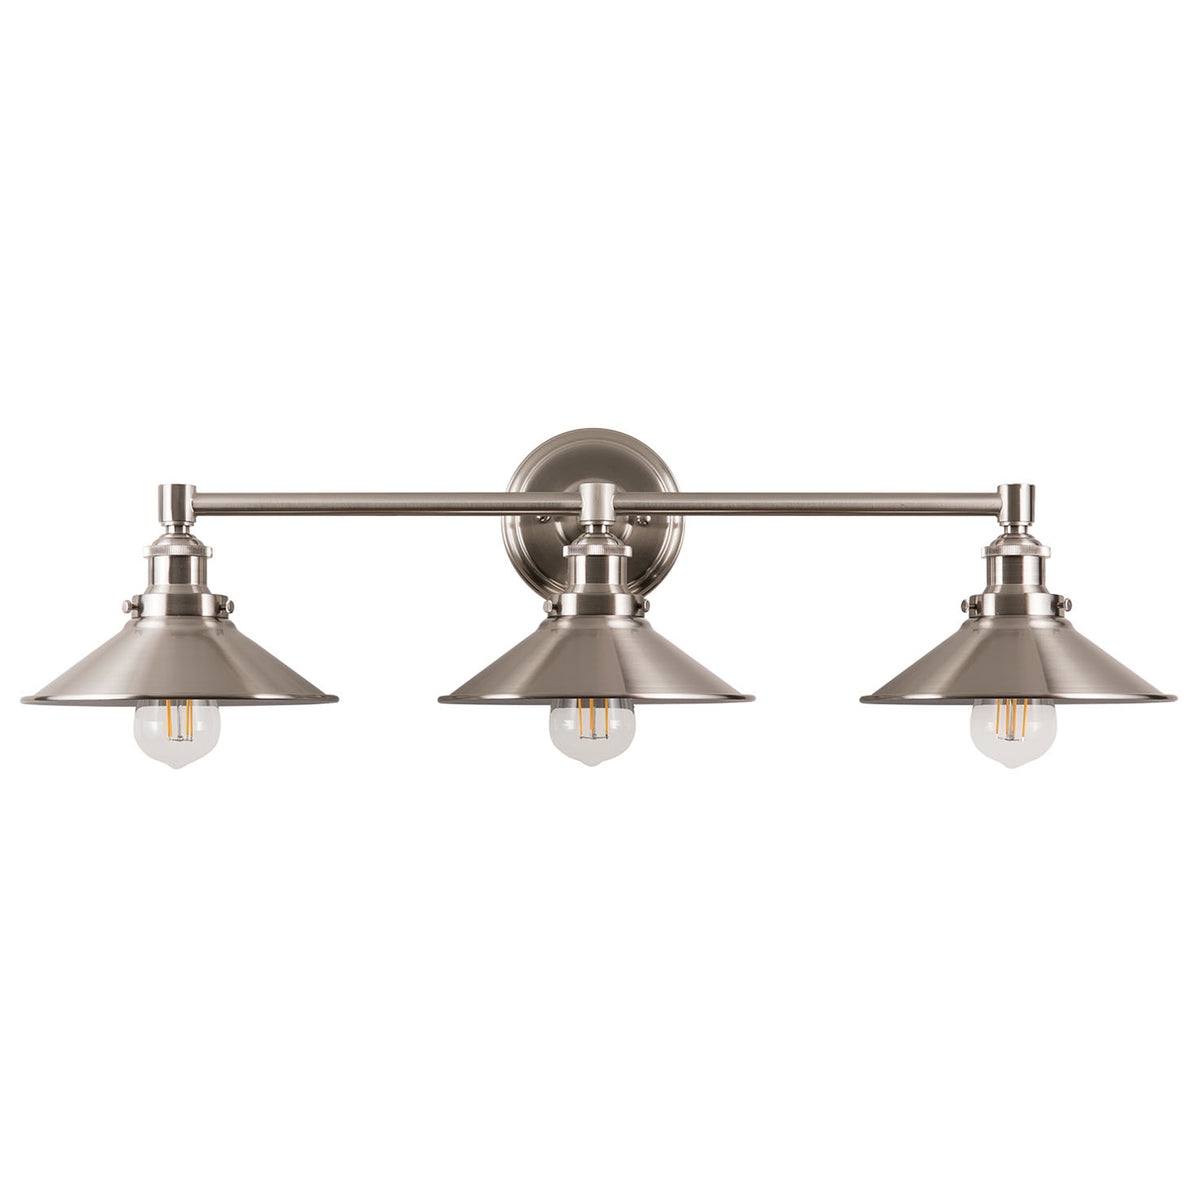 Andante LED Industrial Light Wall Sconce Brushed Nickel Linea di Liara LL-WL437-BN - 4